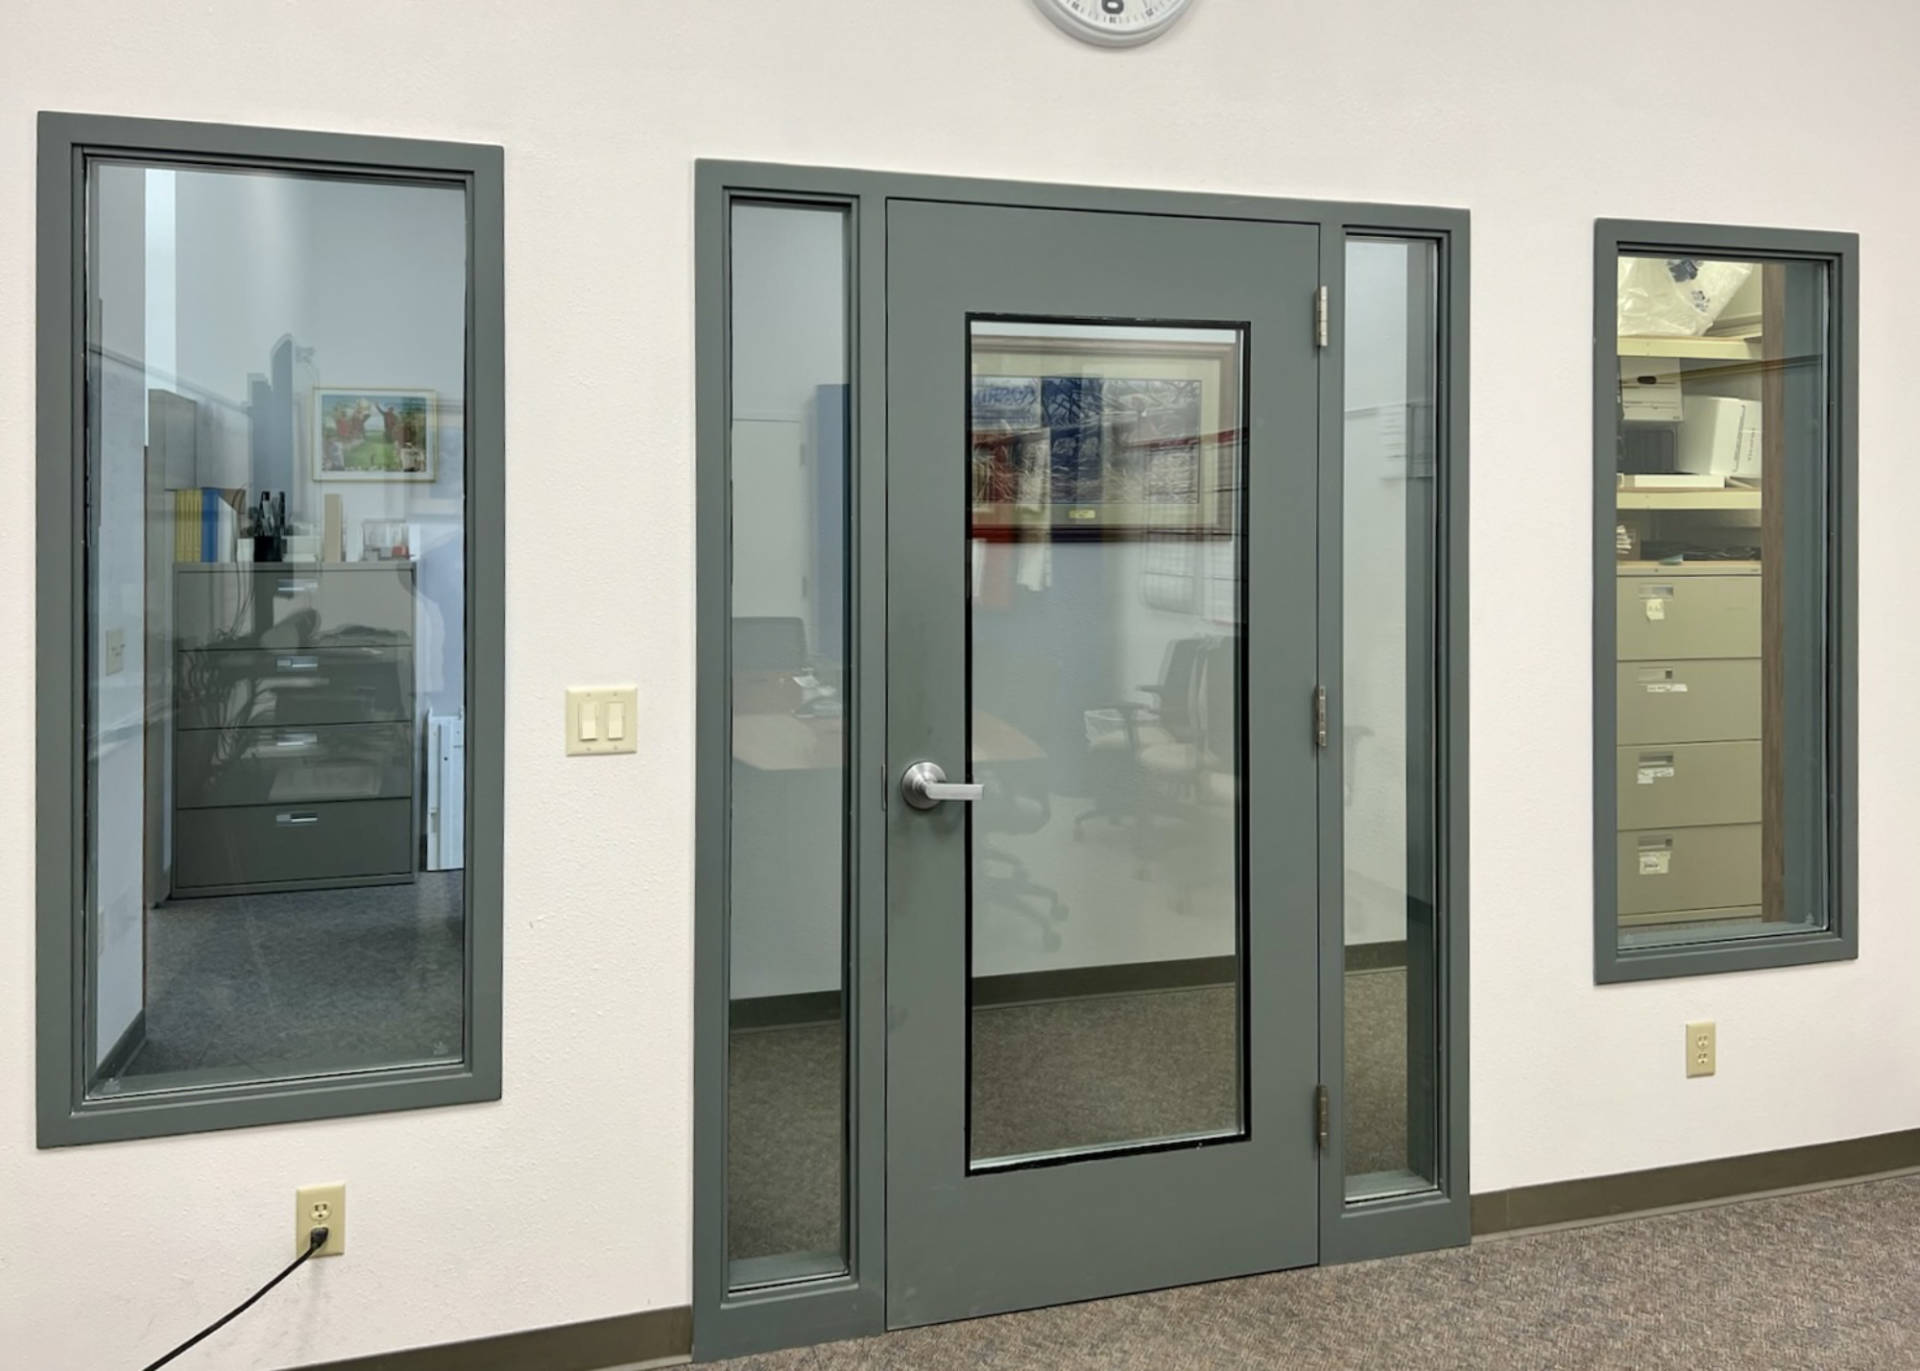 Corrim Corrosion Immune Doors made with Fiberglass Reinforced Polymer FRP doors made in the USA